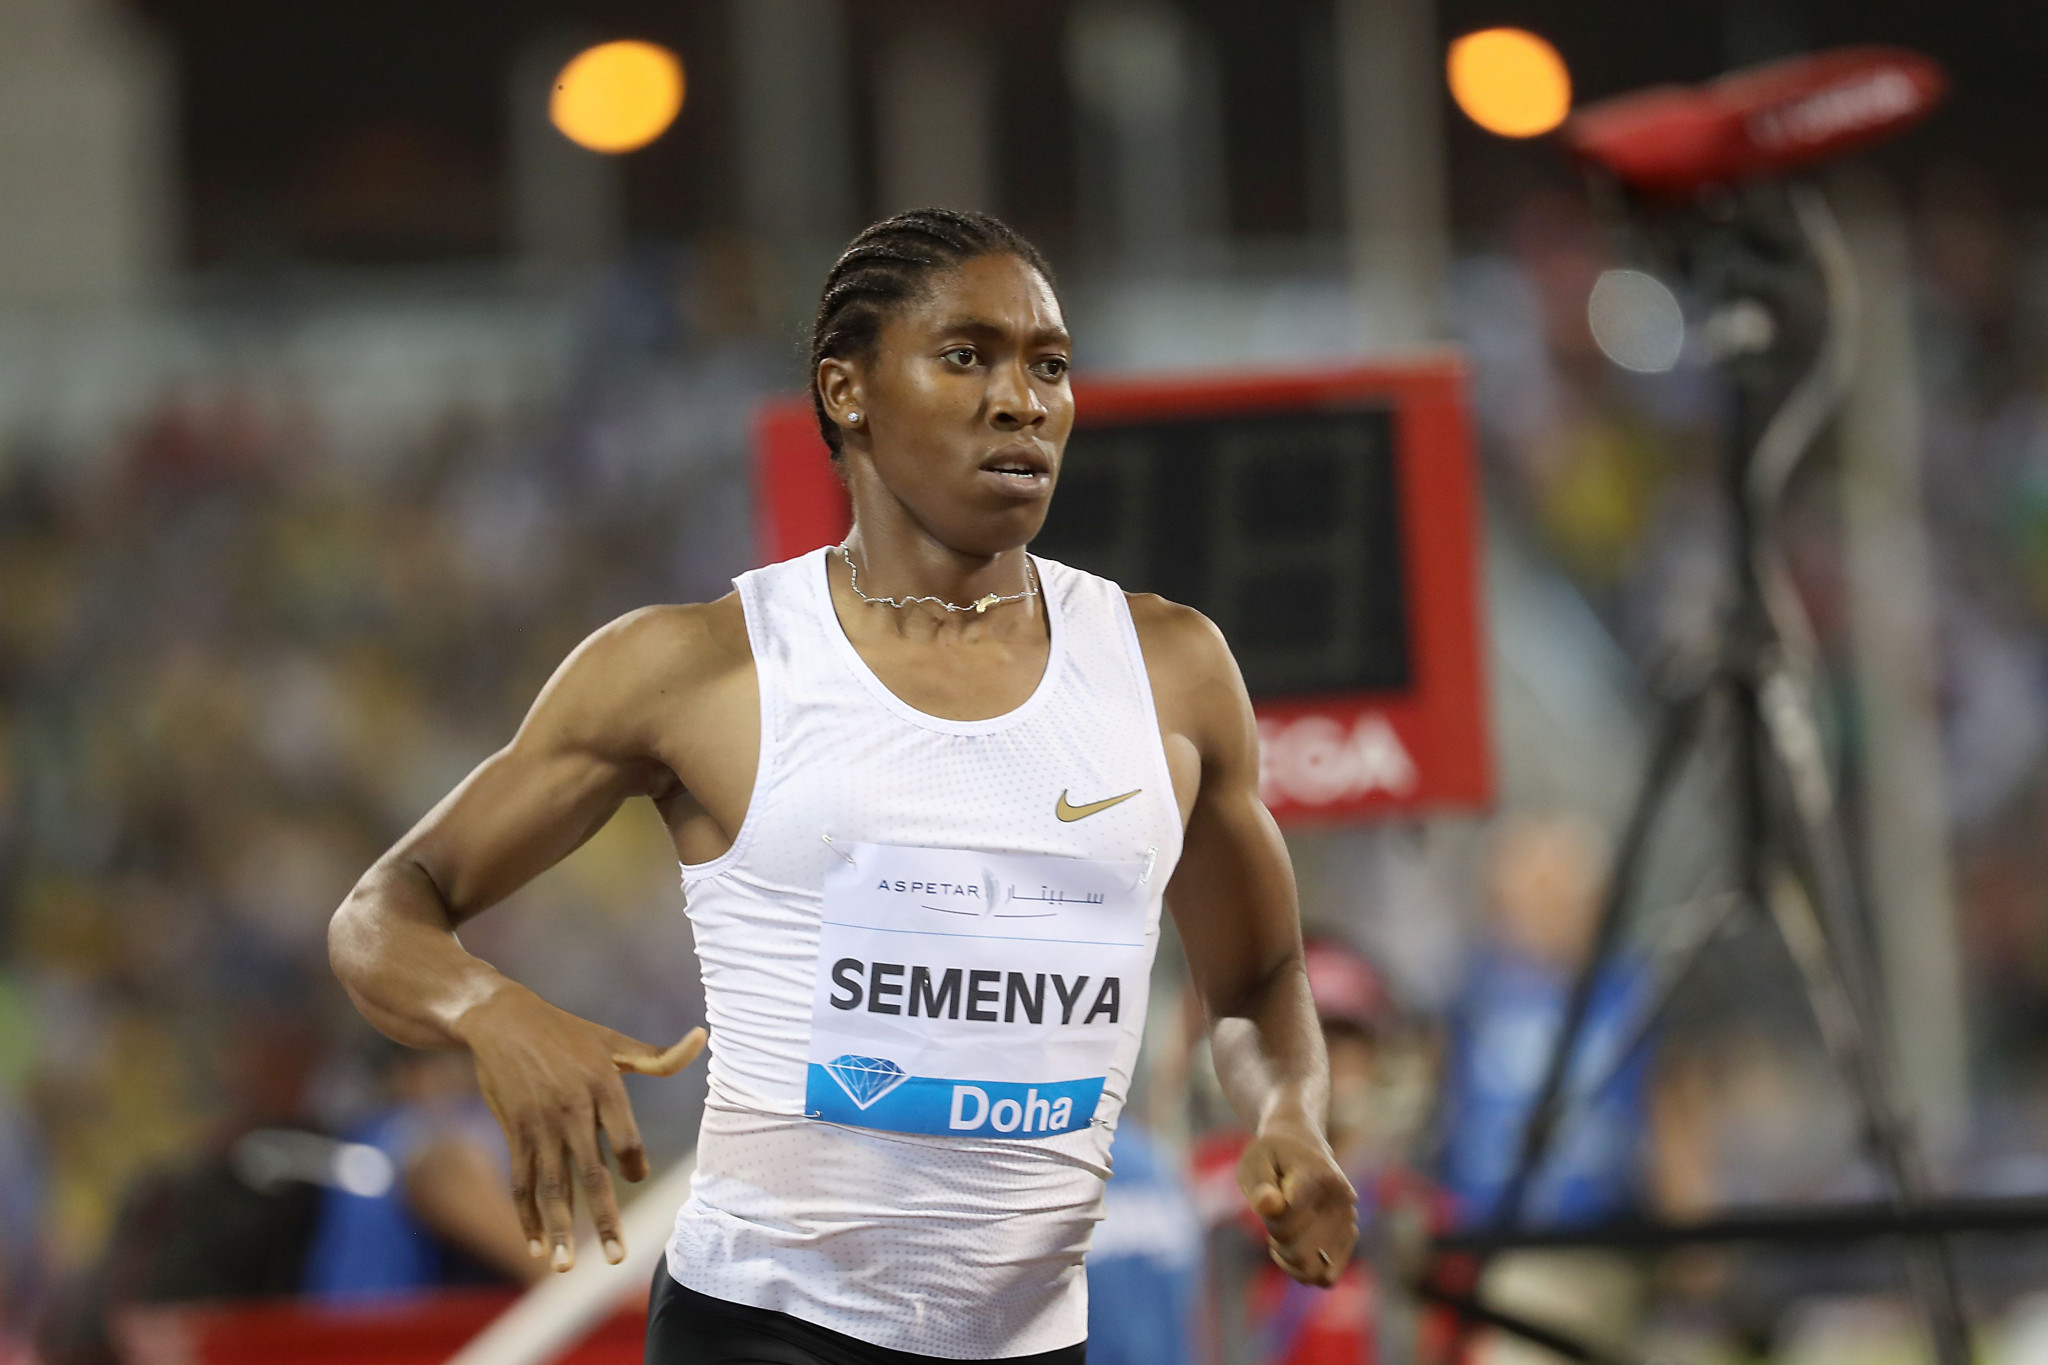 A decision in the Caster Semenya case is expected next month ©Getty Images